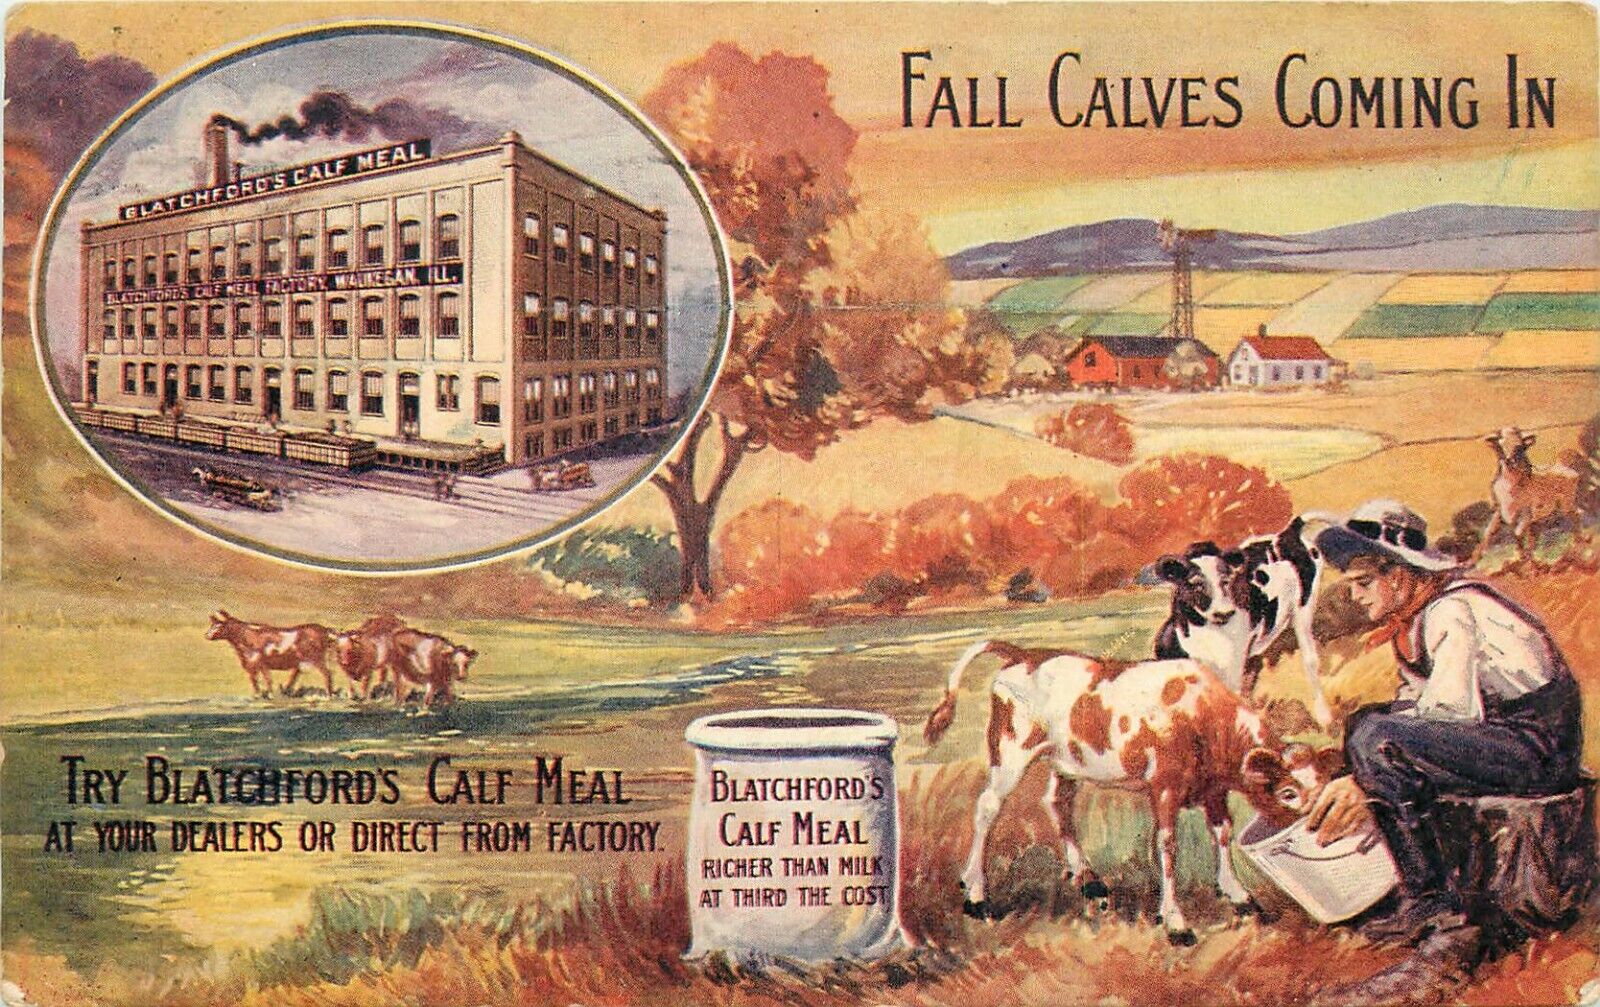 c1911 Advertising Postcard Blatchford\'s Calf Meal, Richer than Milk 1/3 the Cost